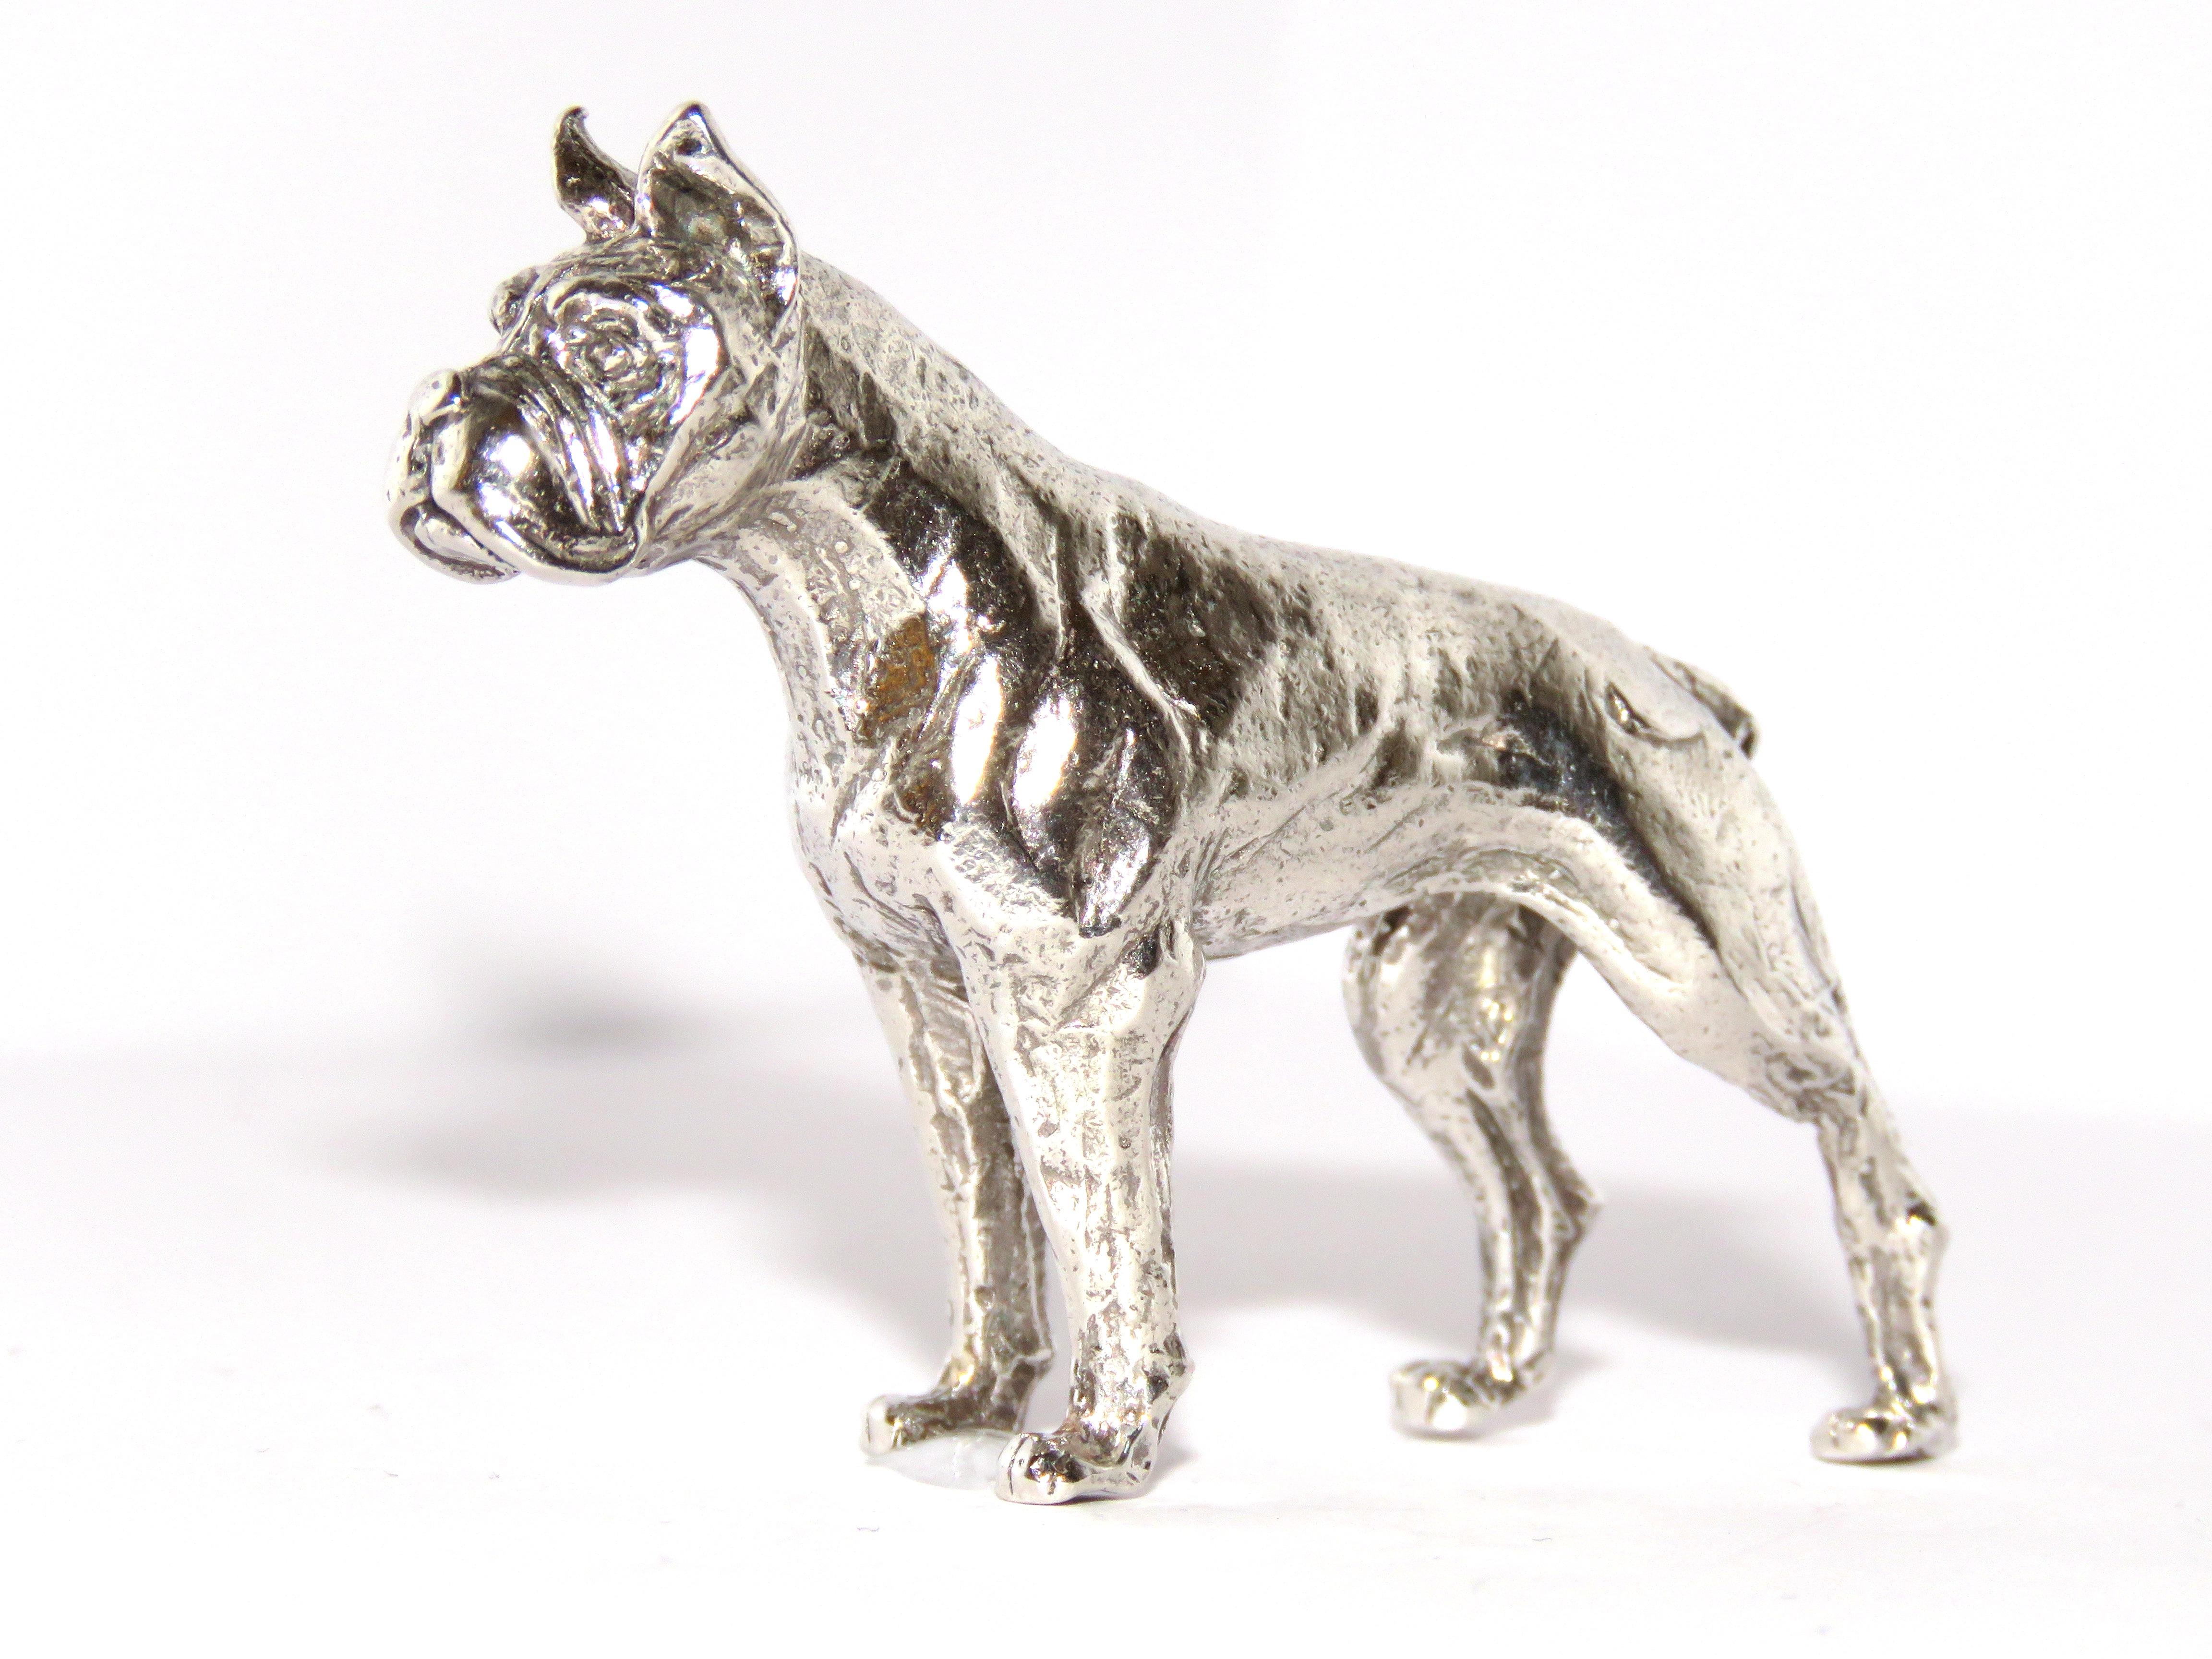 Solid silver boxer dog figurine, in very good vintage condition.
Dimensions: Height 45 mm / 1,77 inches - Length from tip of tail to tip of nose 65 mm / 2.55 inches - Weight 56 grams / 1.80 troy ounces
It  is stamped with the Silver Italian Mark 925